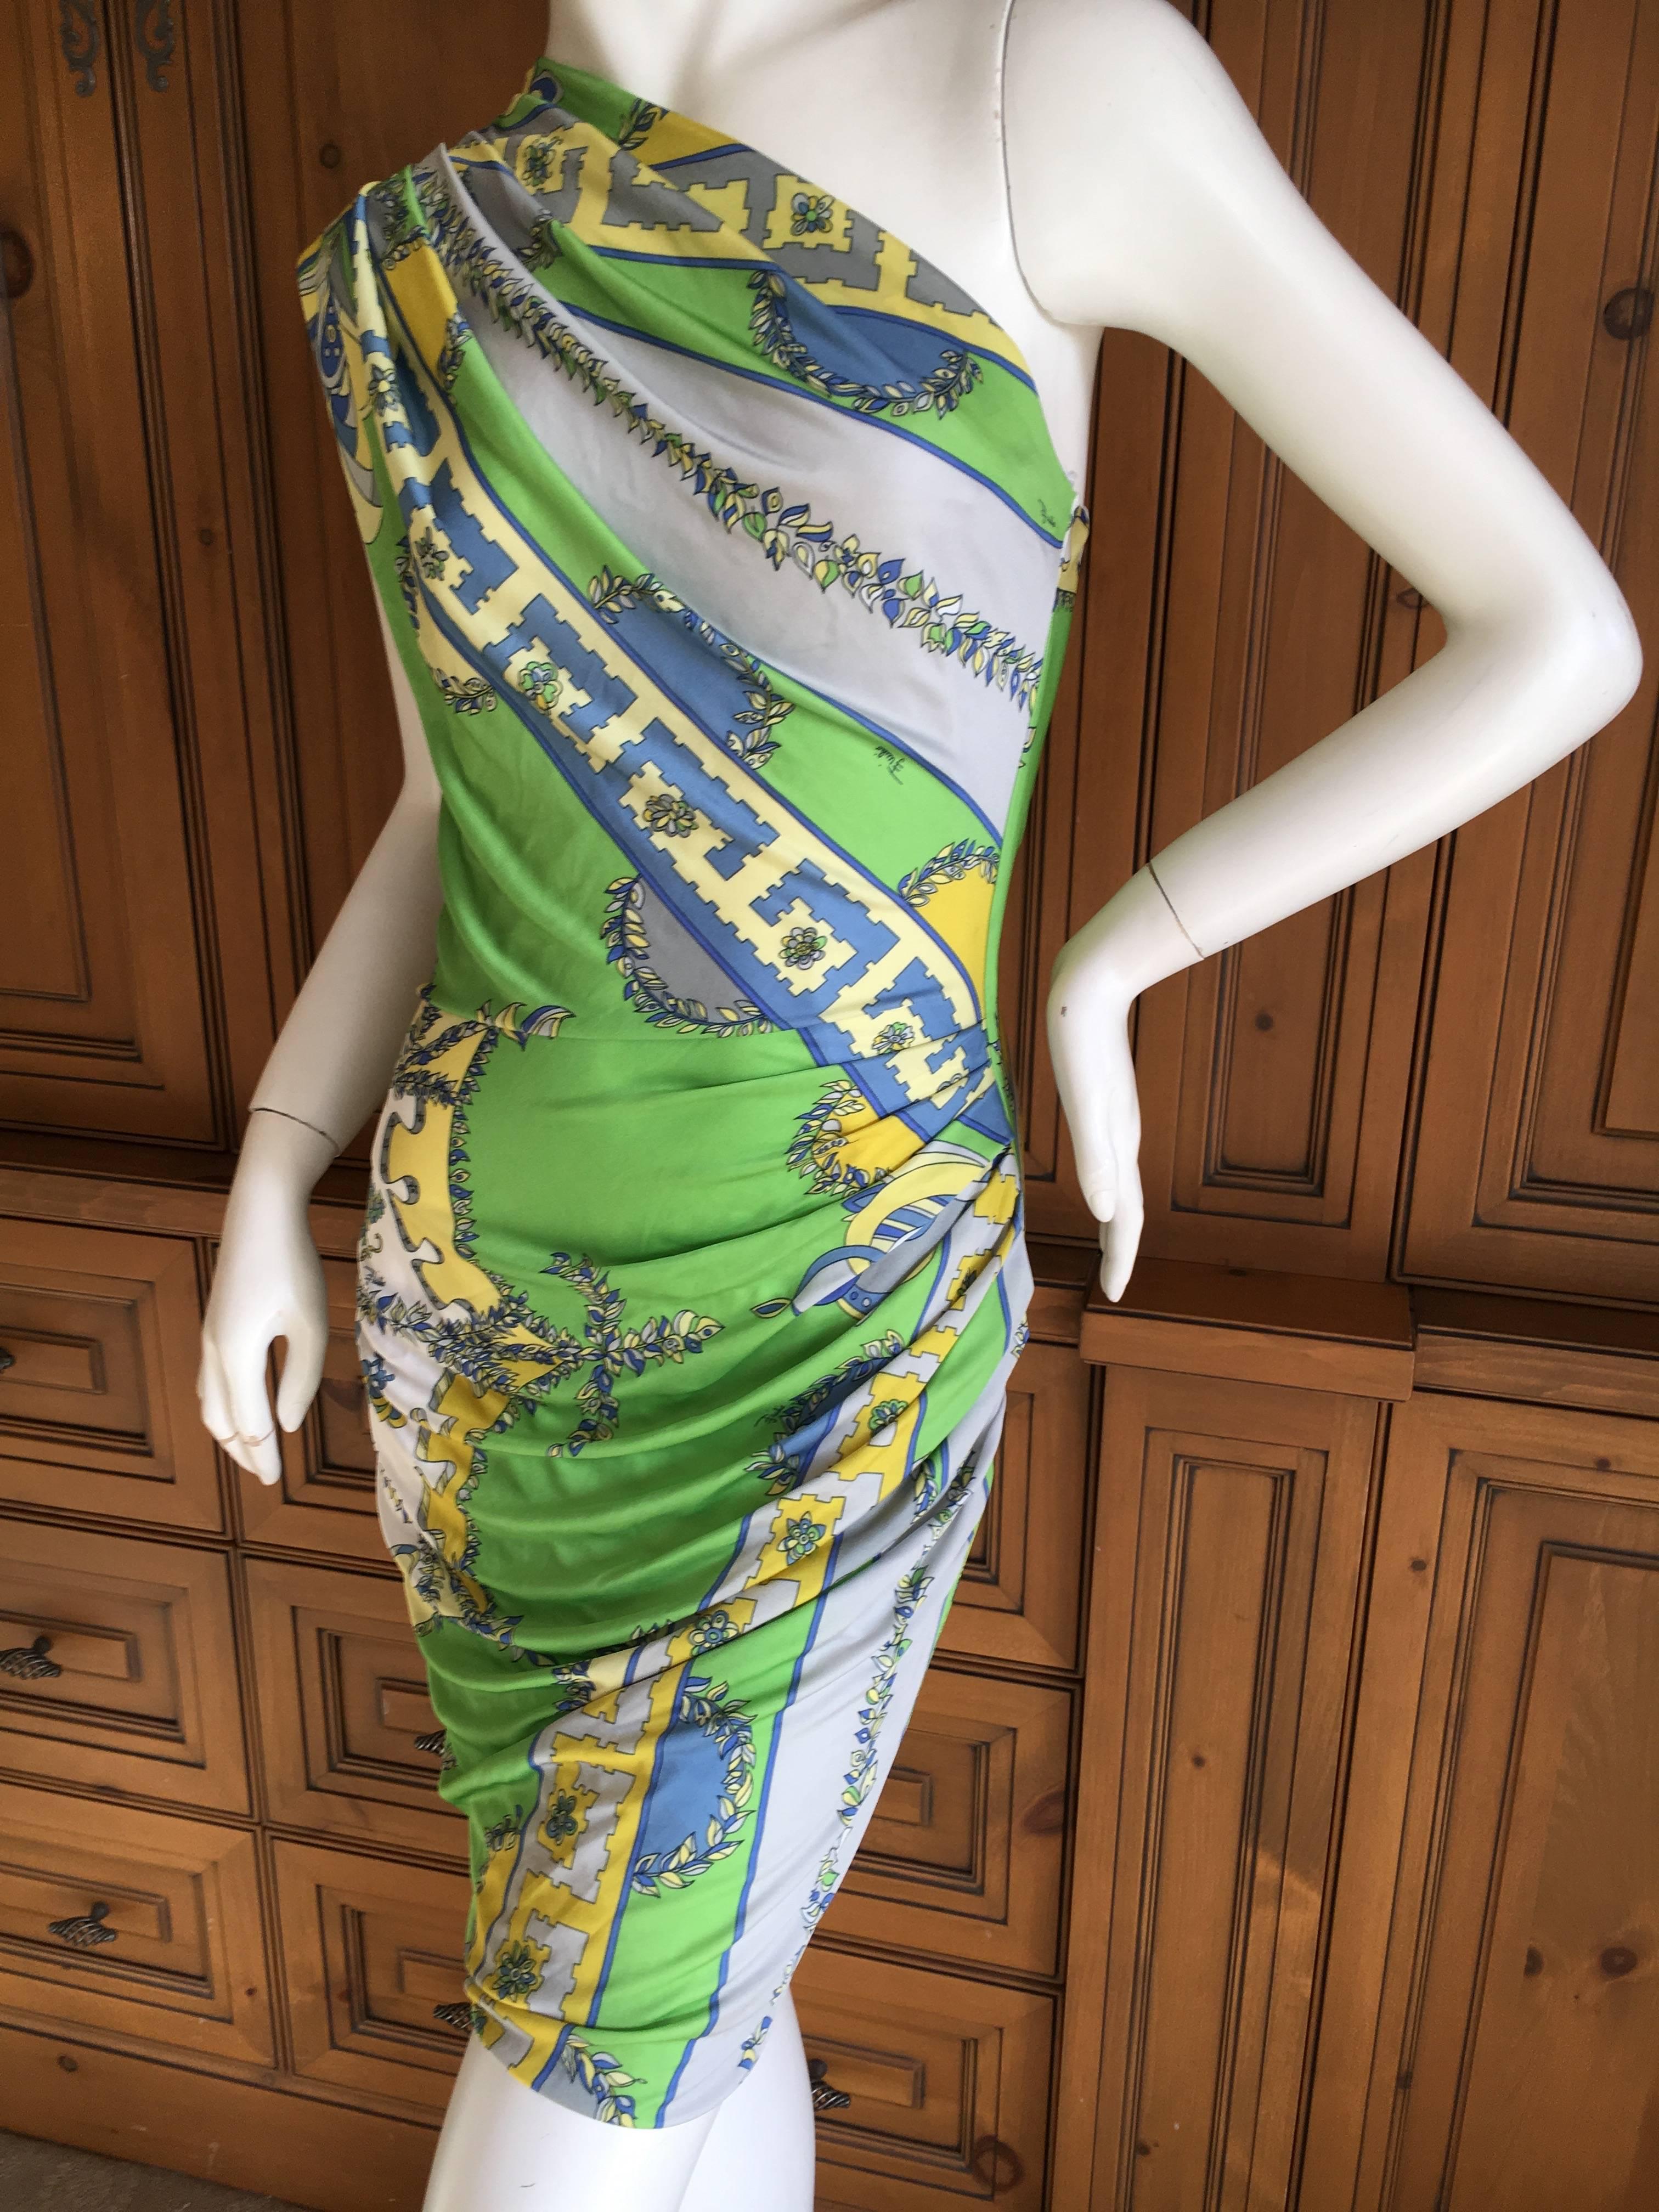 Emilio Pucci Chic One Shoulder Mini Dress.
This is so sweet.
100% Viscose, feels like silk.
Size 36
Bust 38"
Waist 28"
Hips 40"
Length 34"
Excellent condition